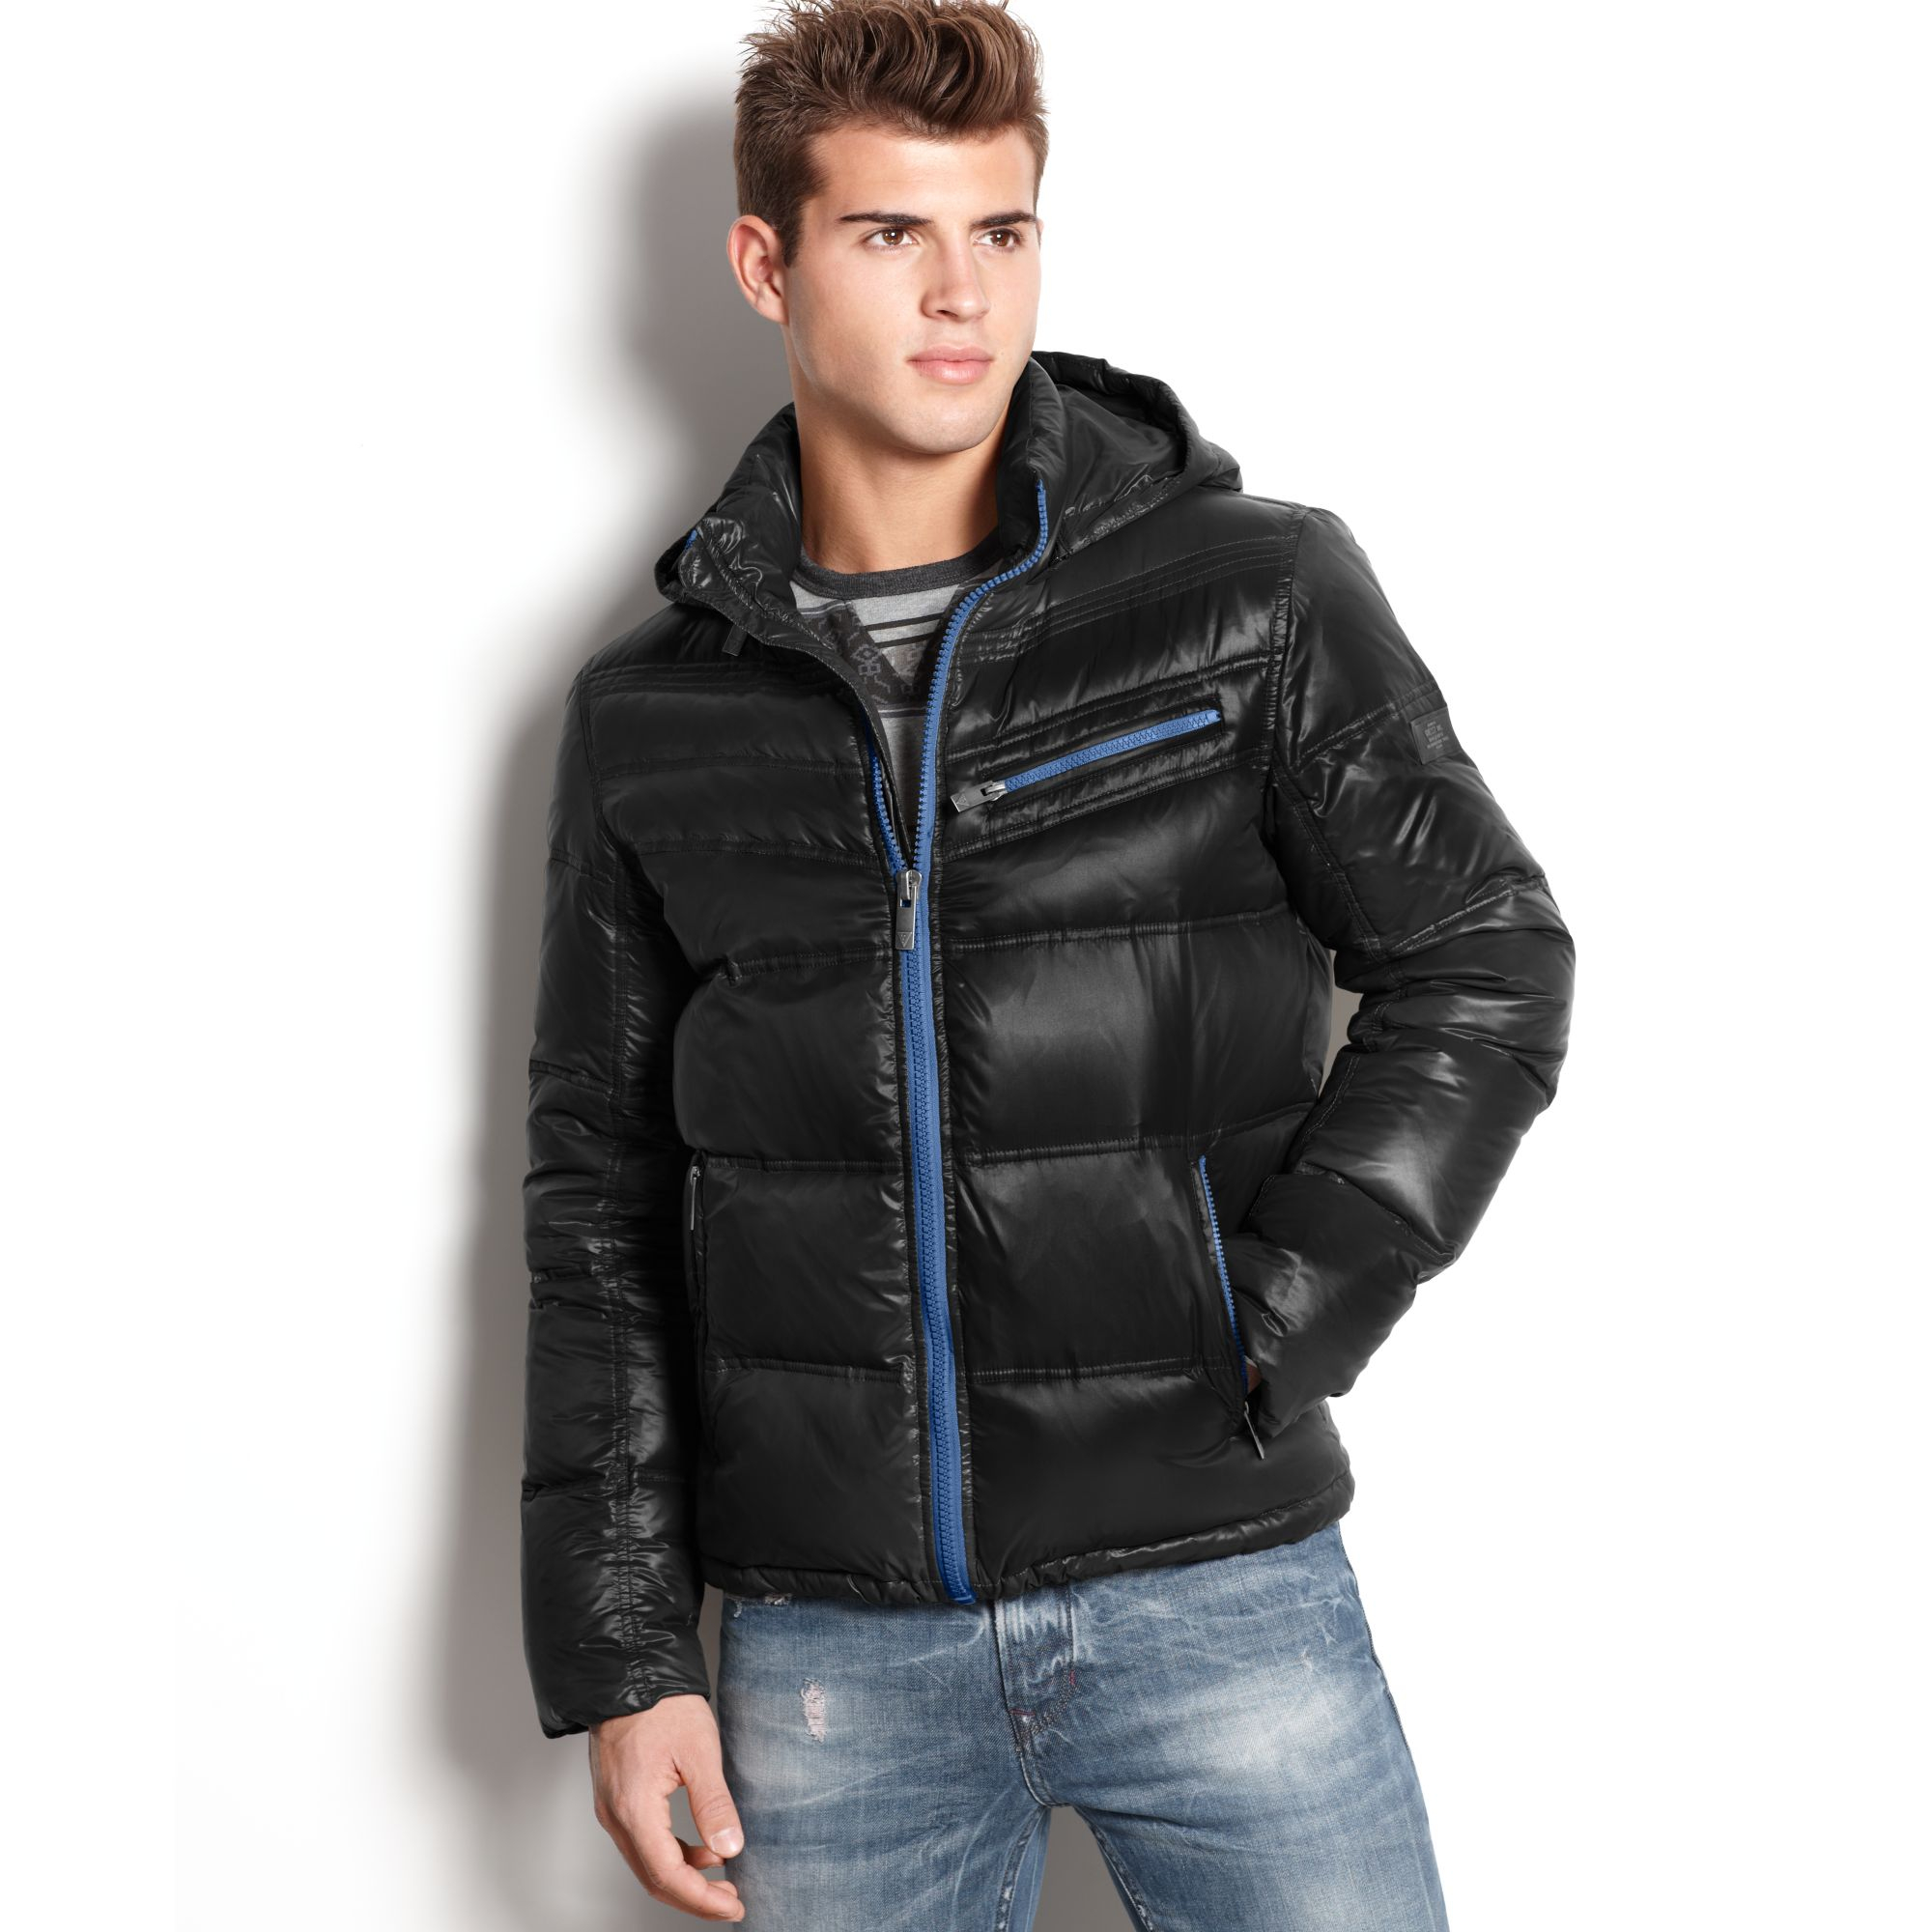 Guess Jacket Chrome Hooded Quilted Puffer in Black for Men - Lyst